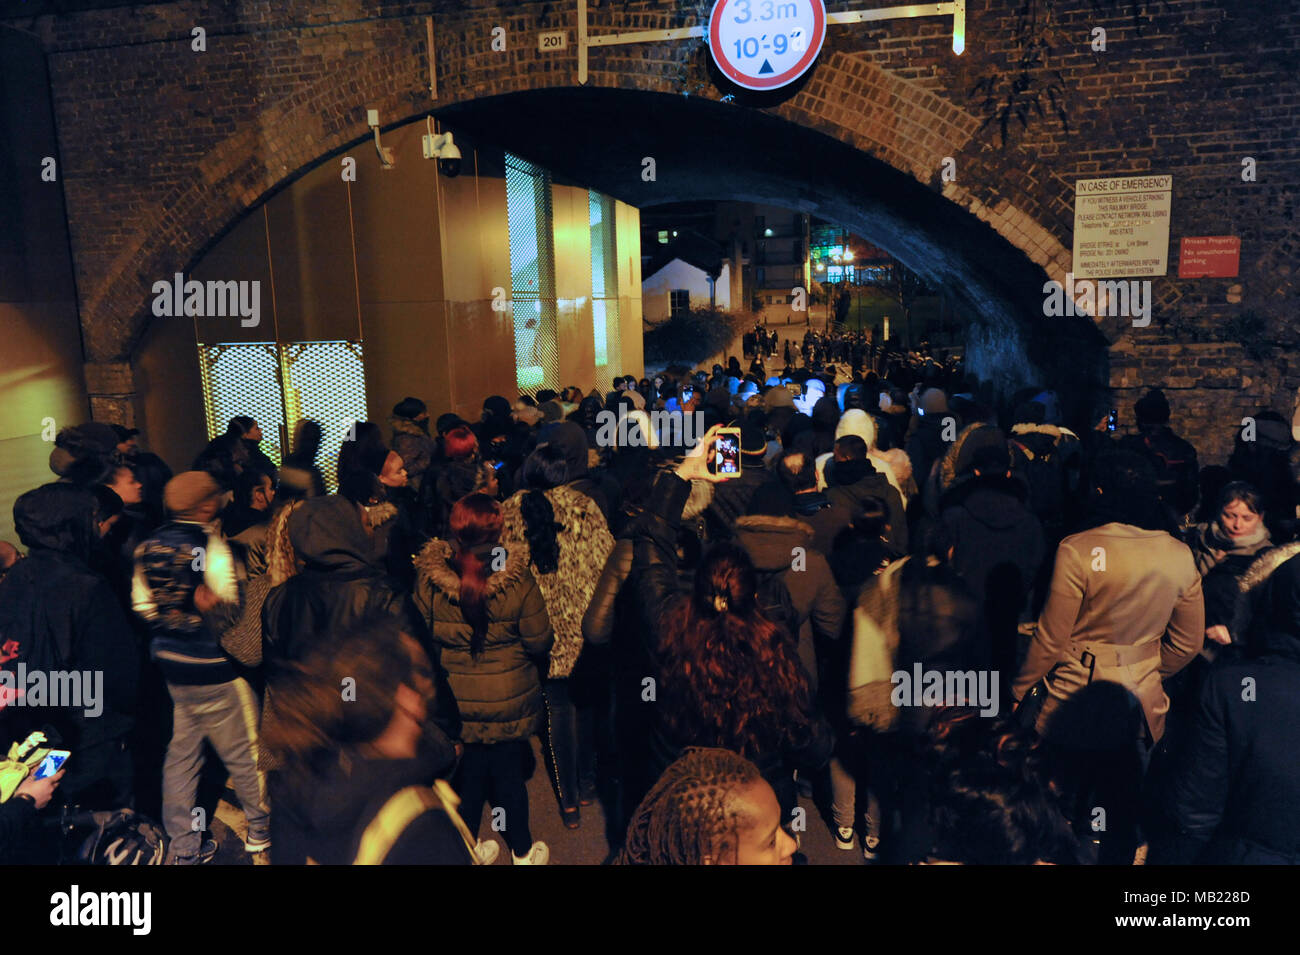 Marchers from the grassroots community organisation, GANG (Guiding A New Generation) arriving at Link Street in Hackney, London, United Kingdom.  The demonstration follows the death on Wednesday (04.04.2018) of 18-year-old Israel Ogunsola who was stabbed to death and died in Link Street, Hackney. Police found him wounded after they were alerted by a motorist just before 8.00pm.   He was given first aid by police officers, but died at the scene at 8.24pm. He was initially thought to be aged in his 20s.  GANG is a youth outreach movement which focusses on the black community and implores young m Stock Photo